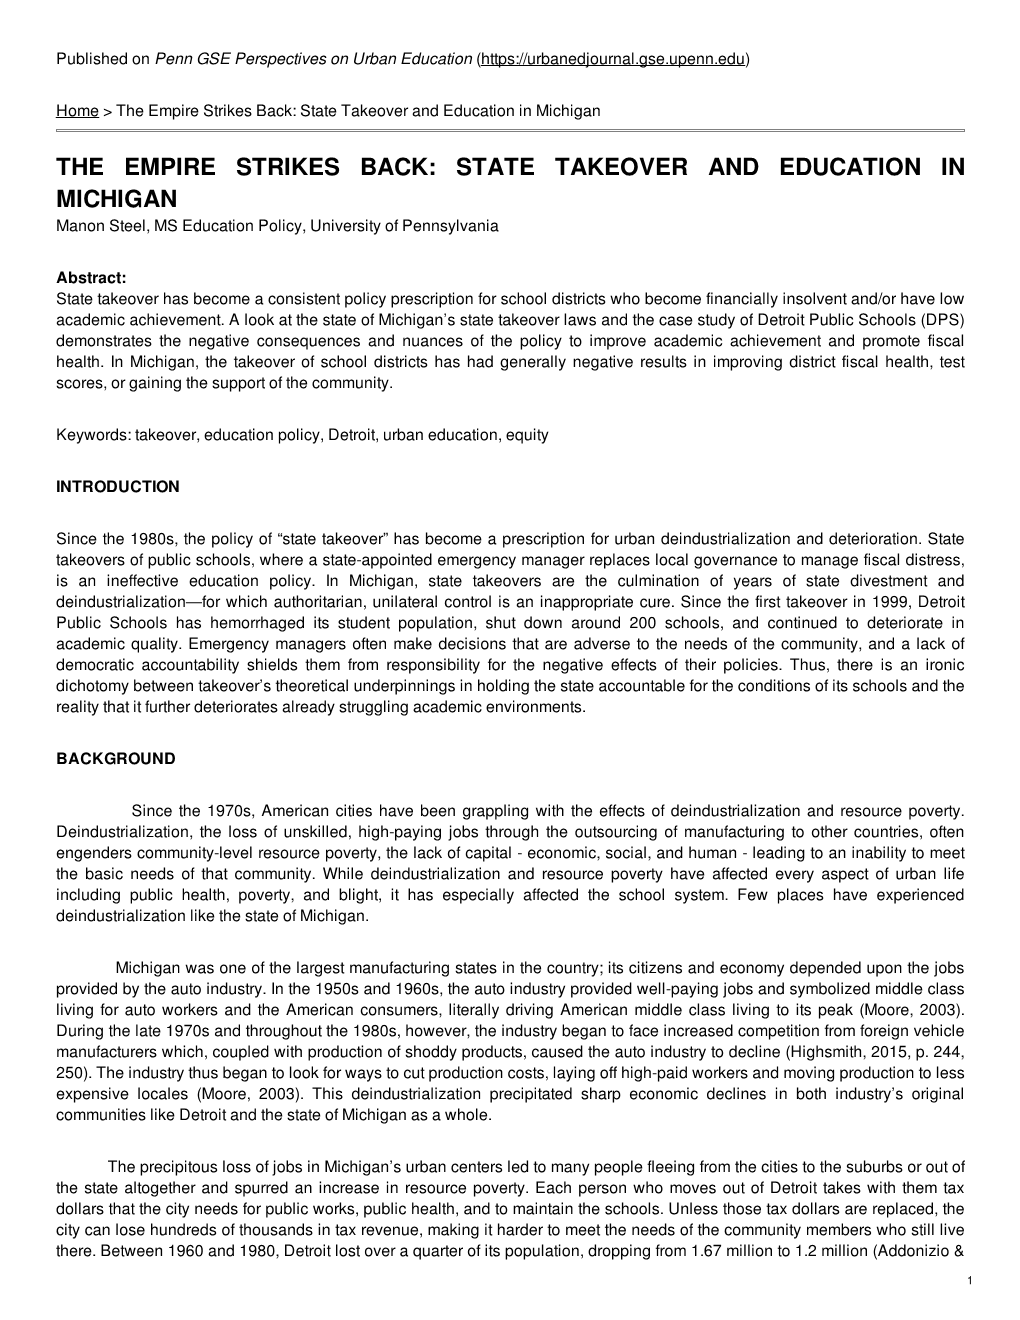 The Empire Strikes Back: State Takeover and Education in Michigan